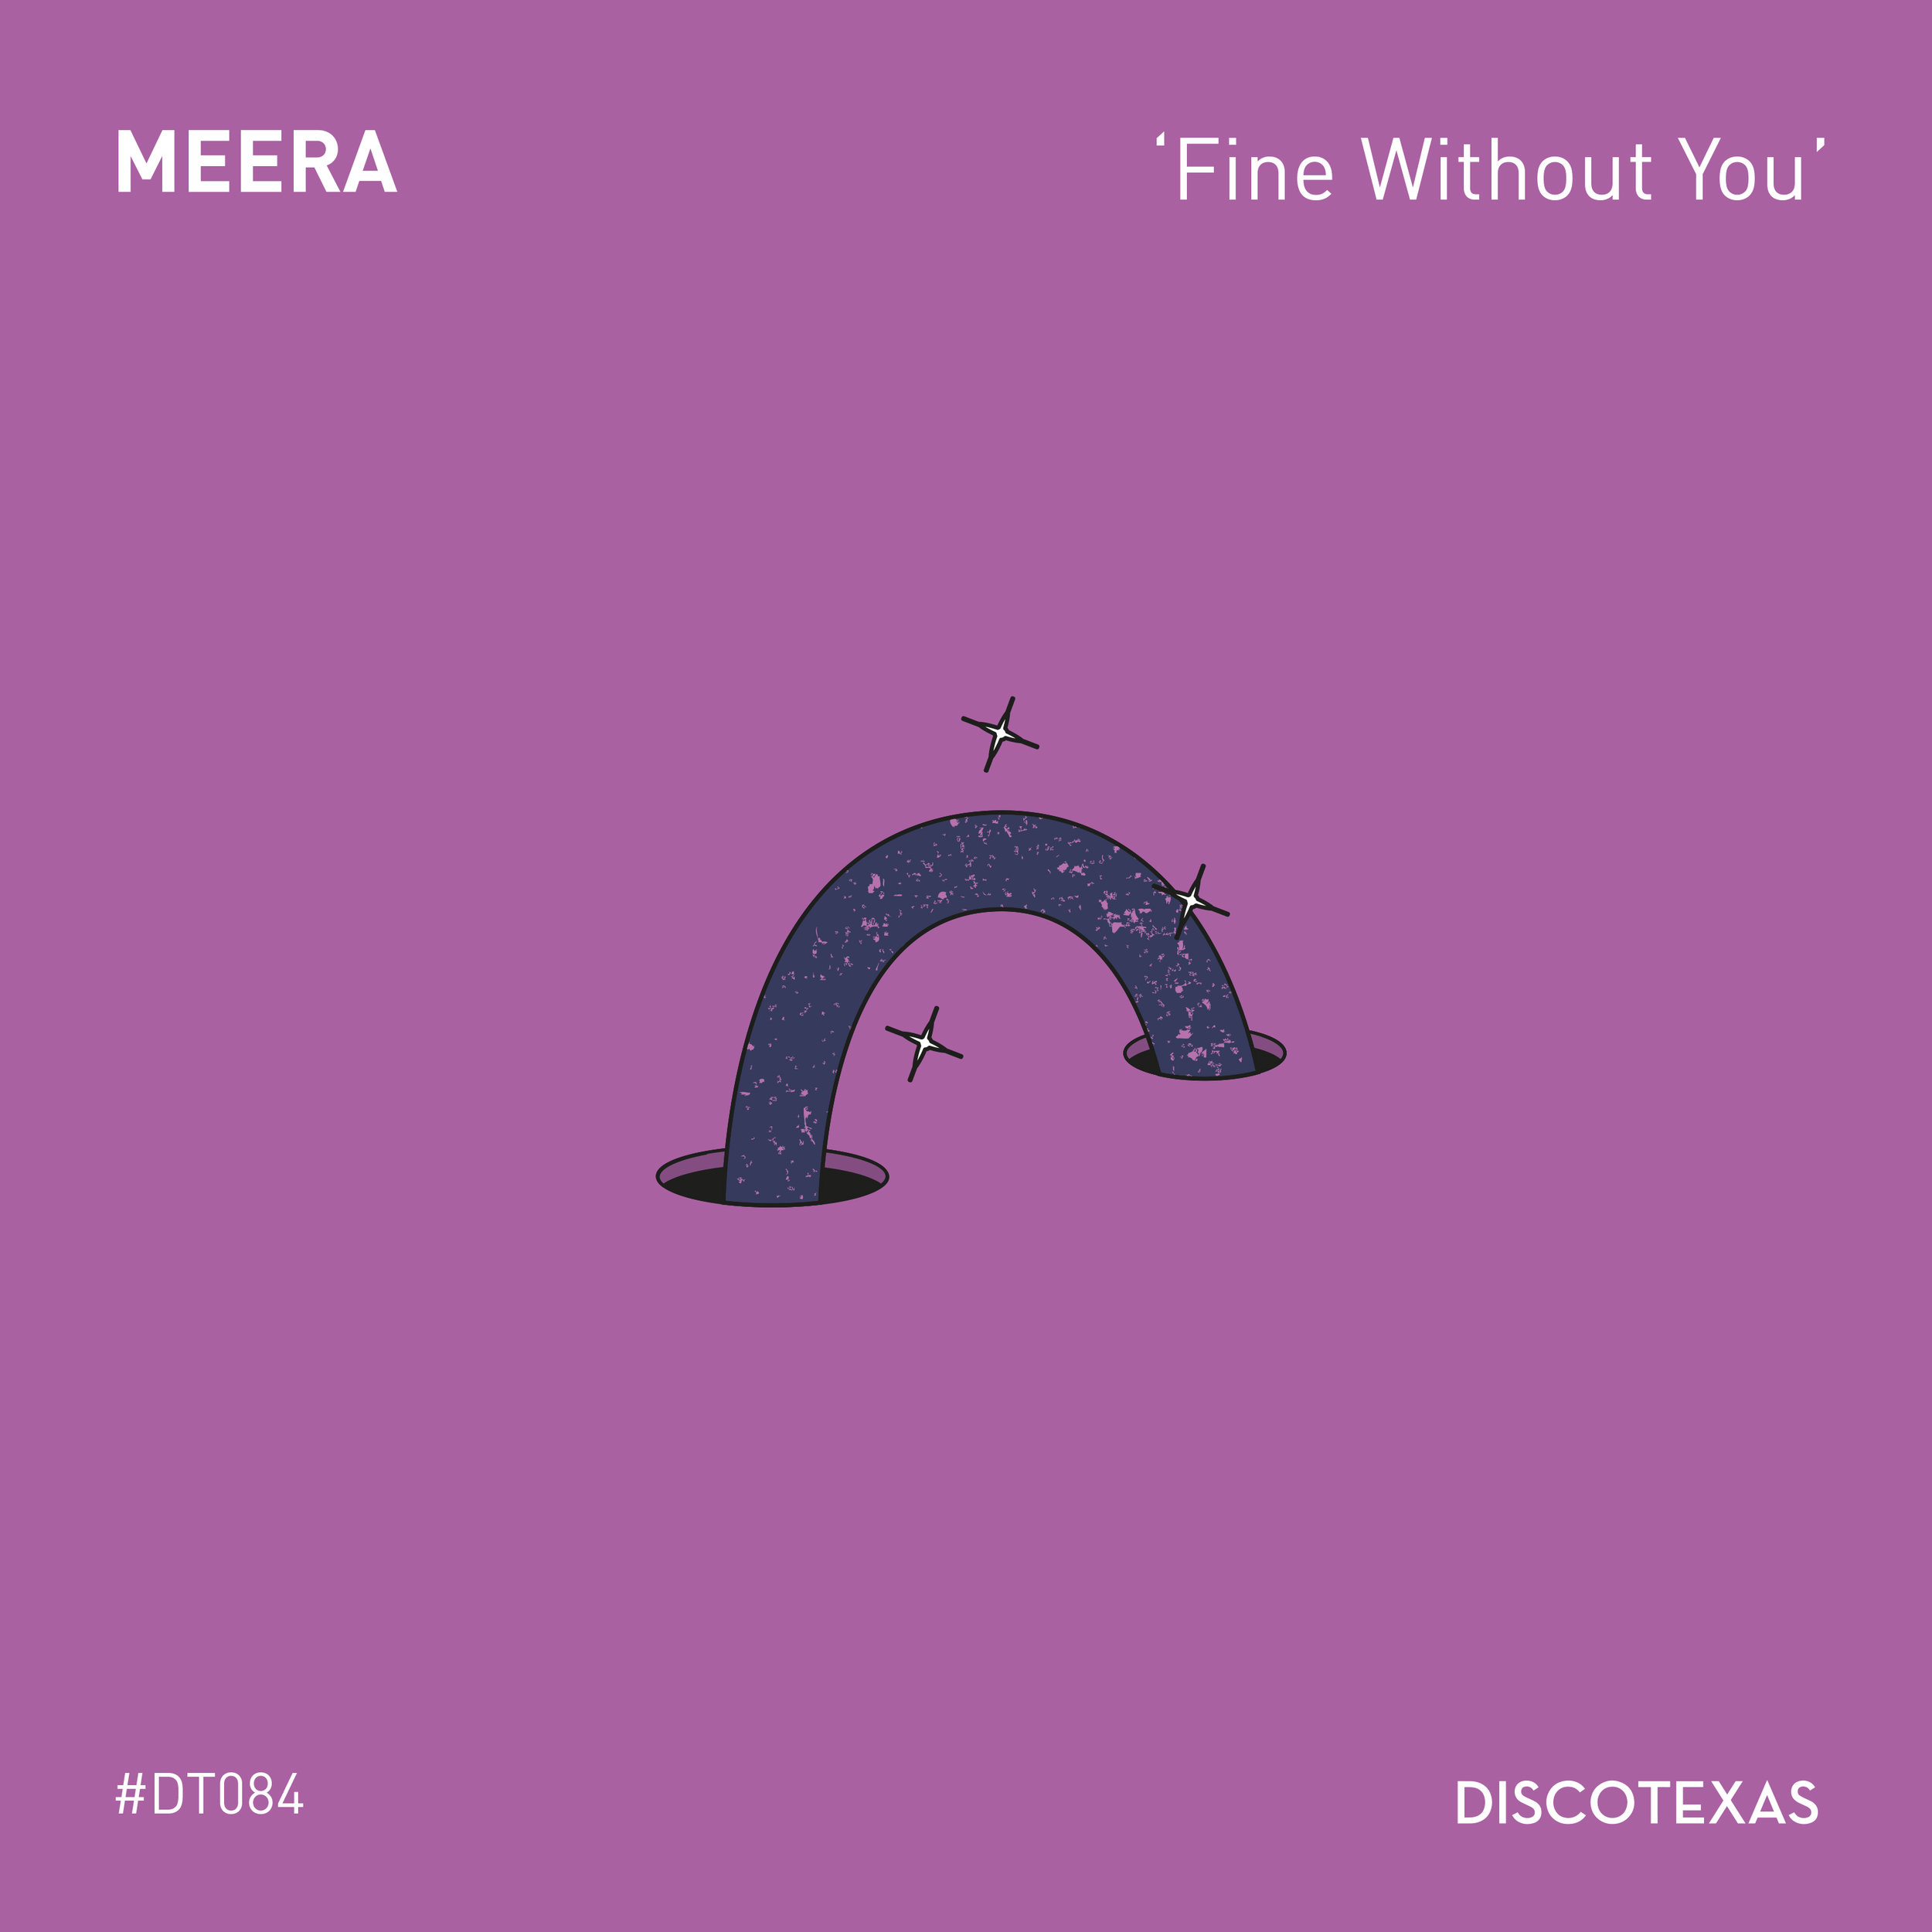 DT084: MEERA - Fine Without You